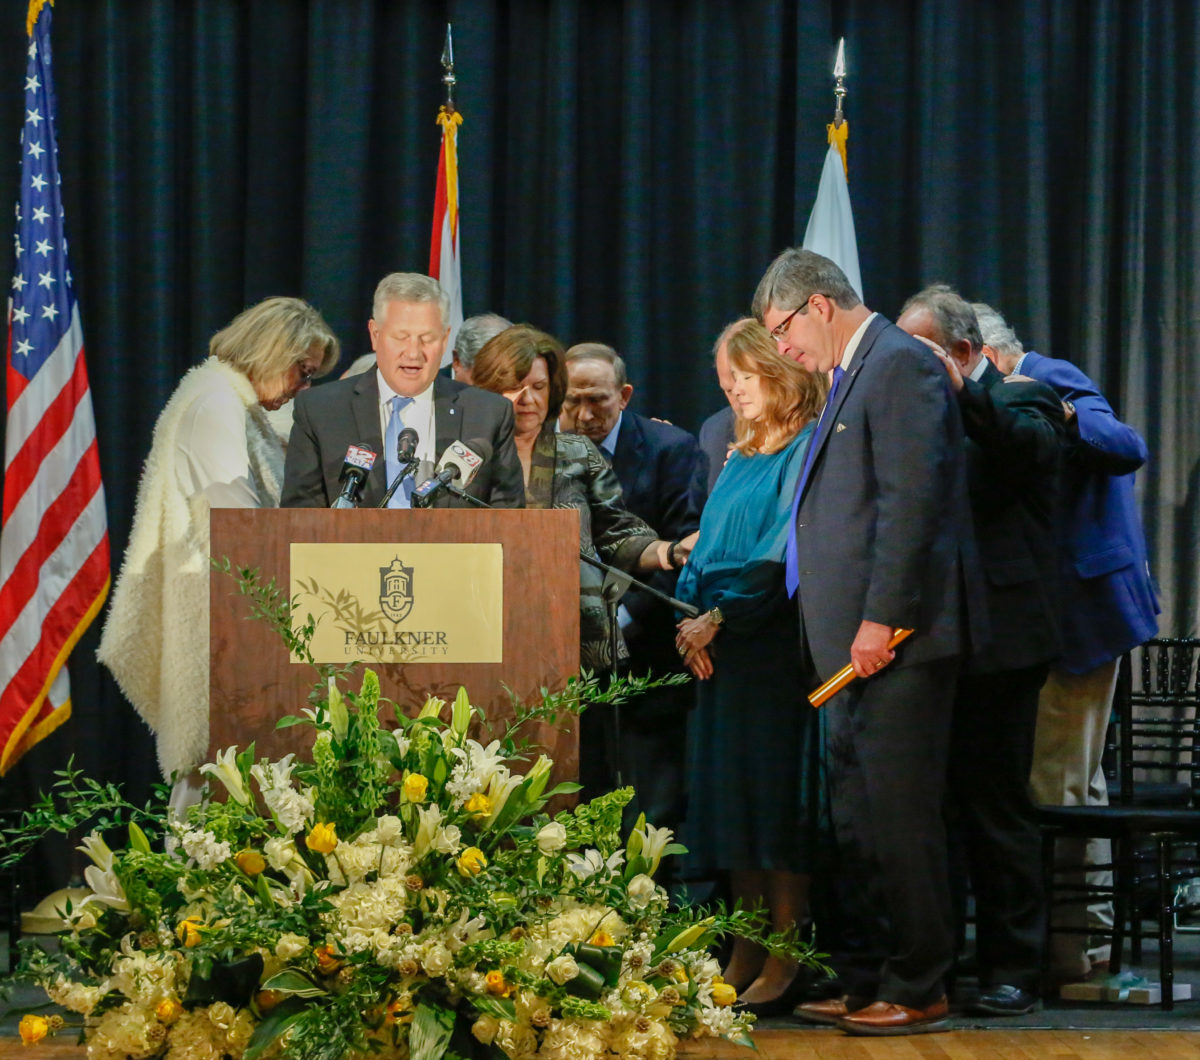 Faulkner University Board or Trustee members lay hands on President elect Mitch Henry